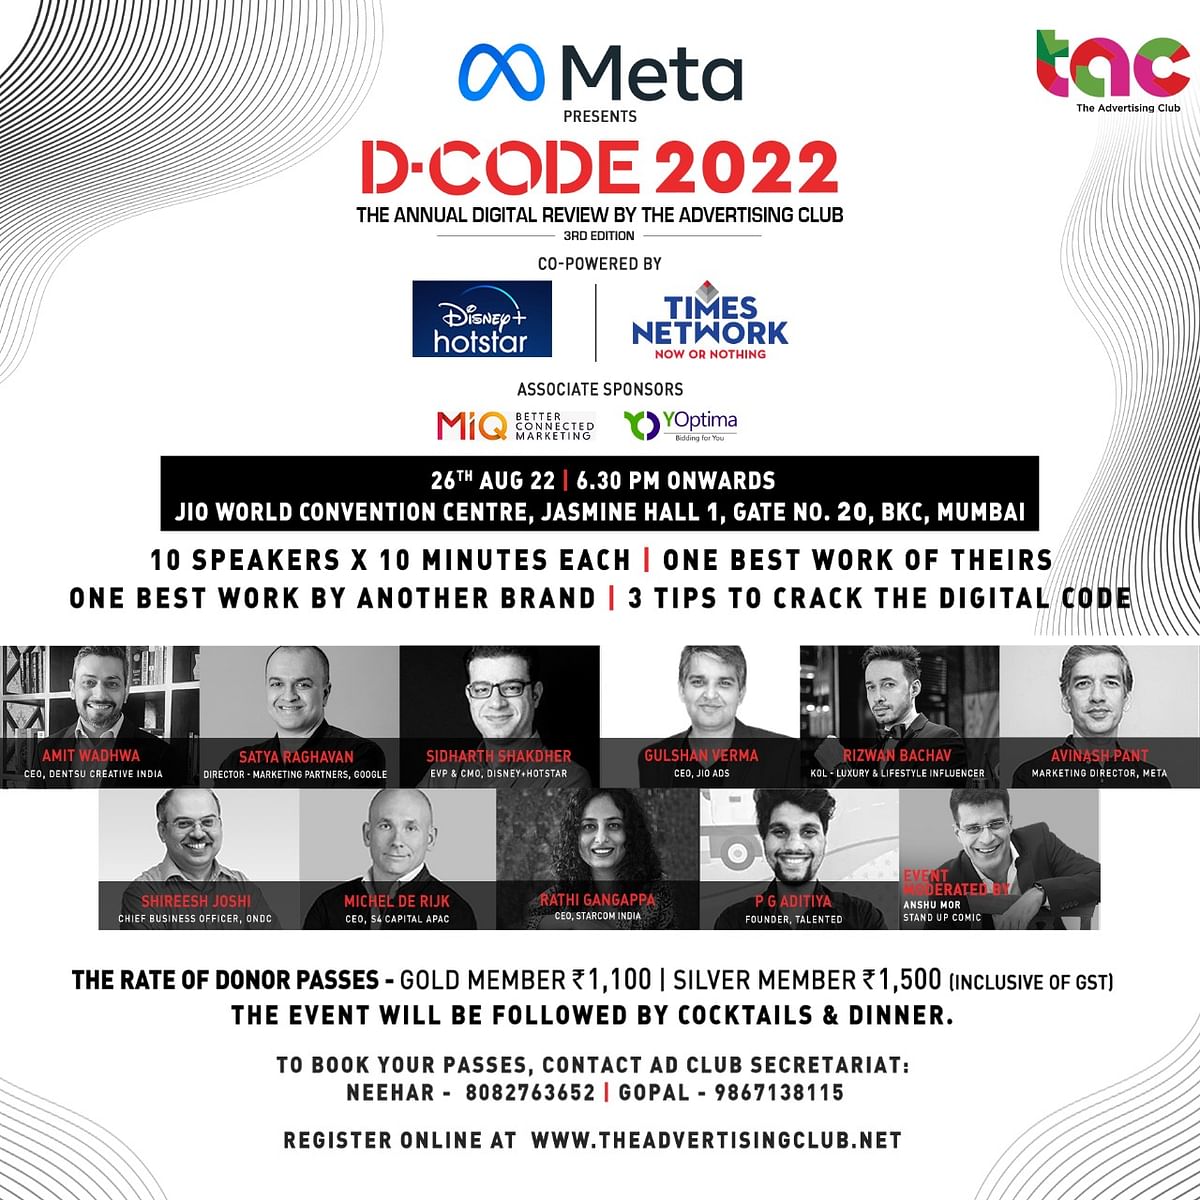 10 industry veterans to crack the D:CODE at the third edition of the Annual Digital Review by The Advertising Club